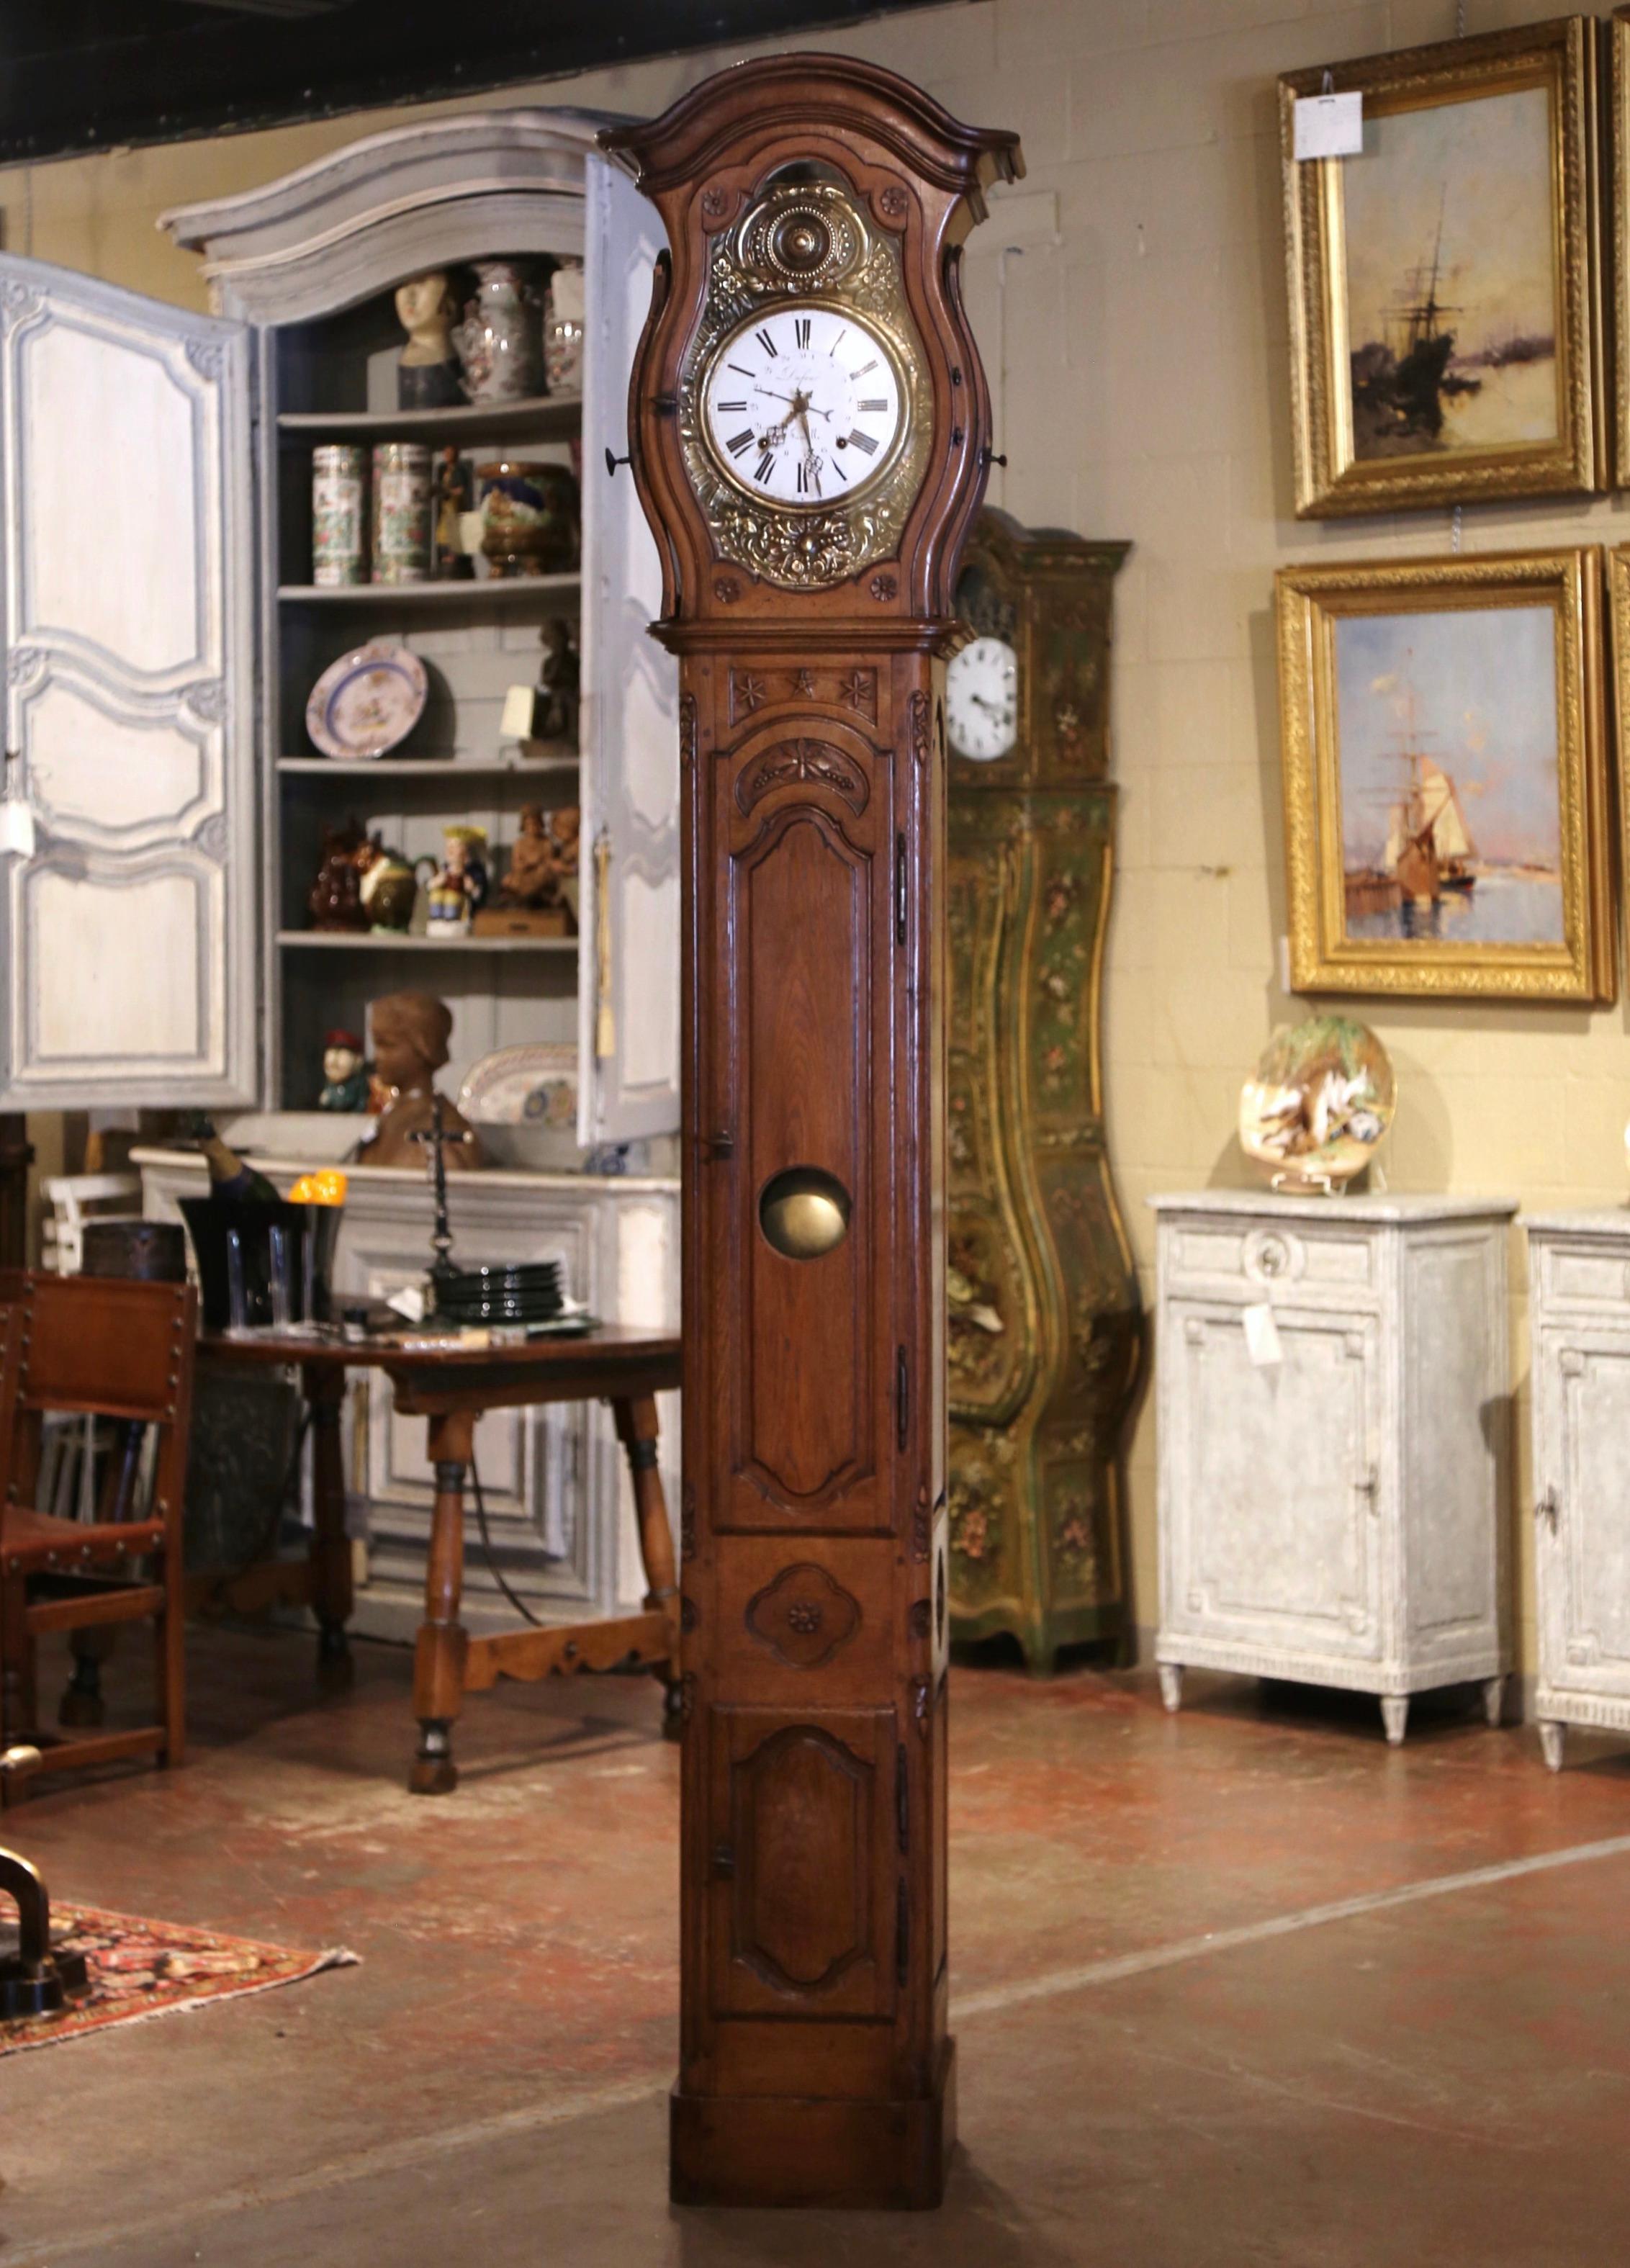 This elegant, antique long case clock was crafted in Lyon, France, circa 1780. The tall grandfather clock stands on a thick bottom plinth; it features a curved bonnet top at the top with bowed sides dressed with glass doors in order to admire the